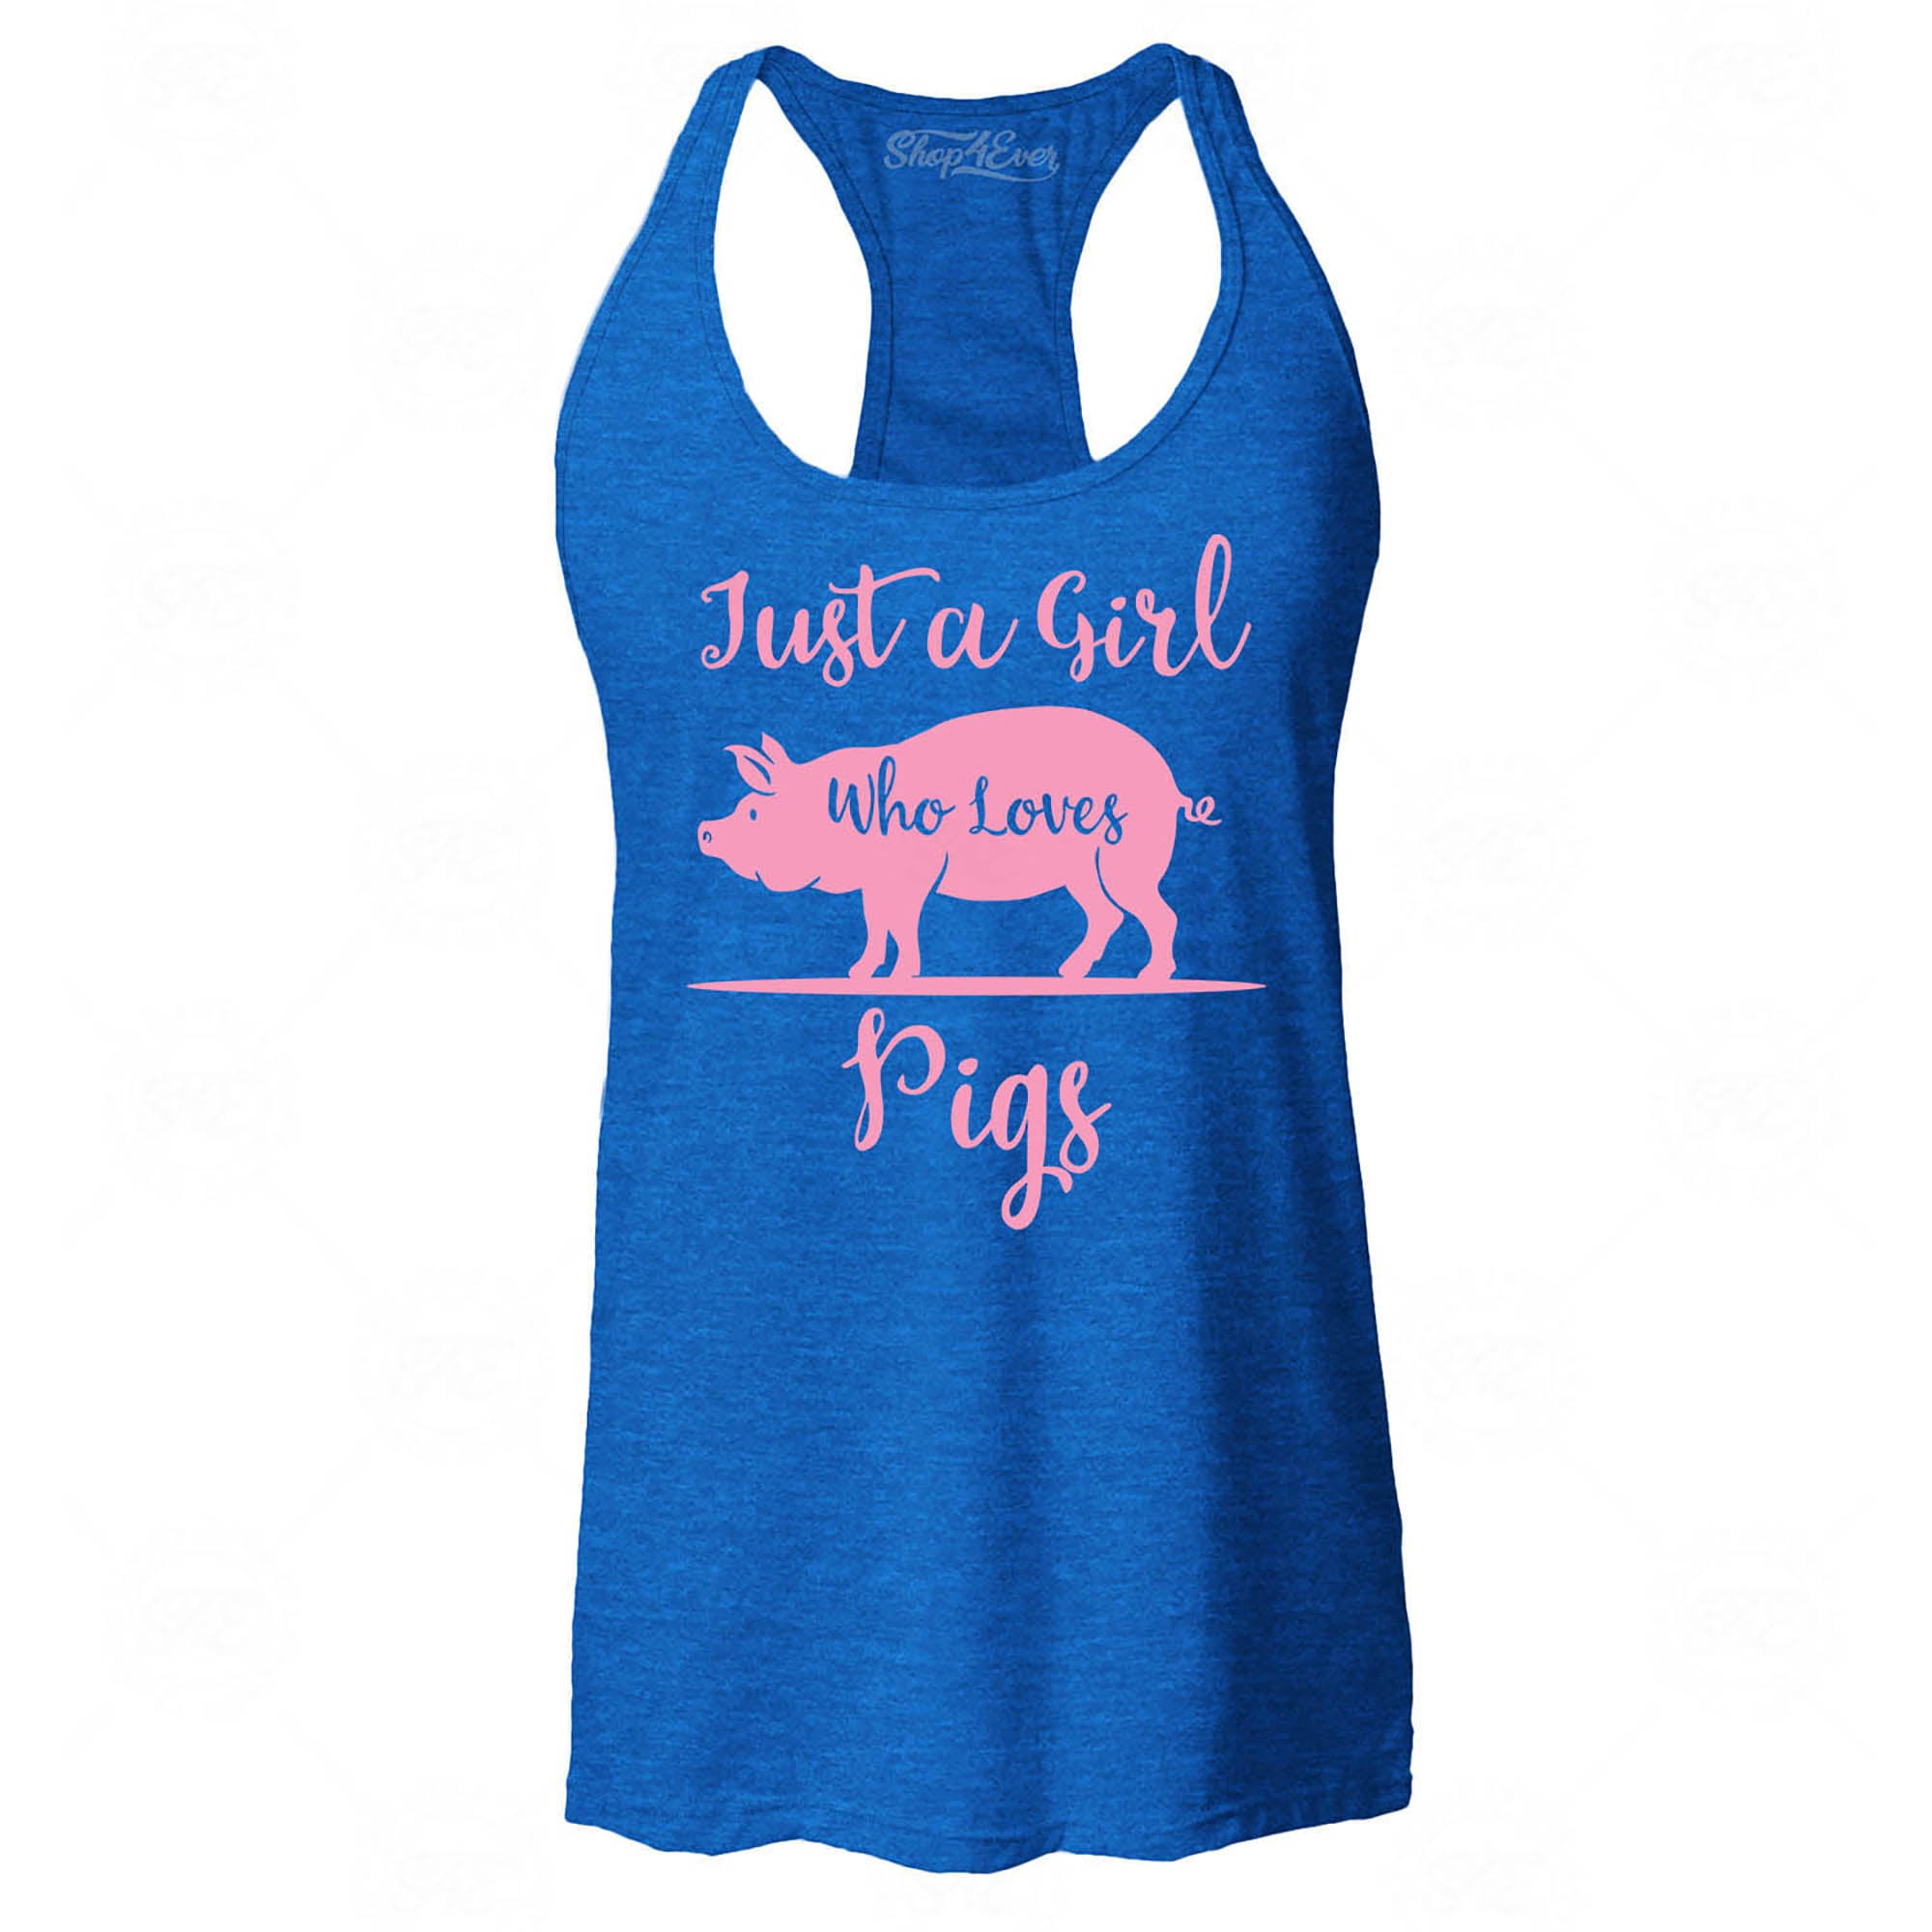 Just A Girl Who Loves Pigs Women's Racerback Tank Top Slim Fit